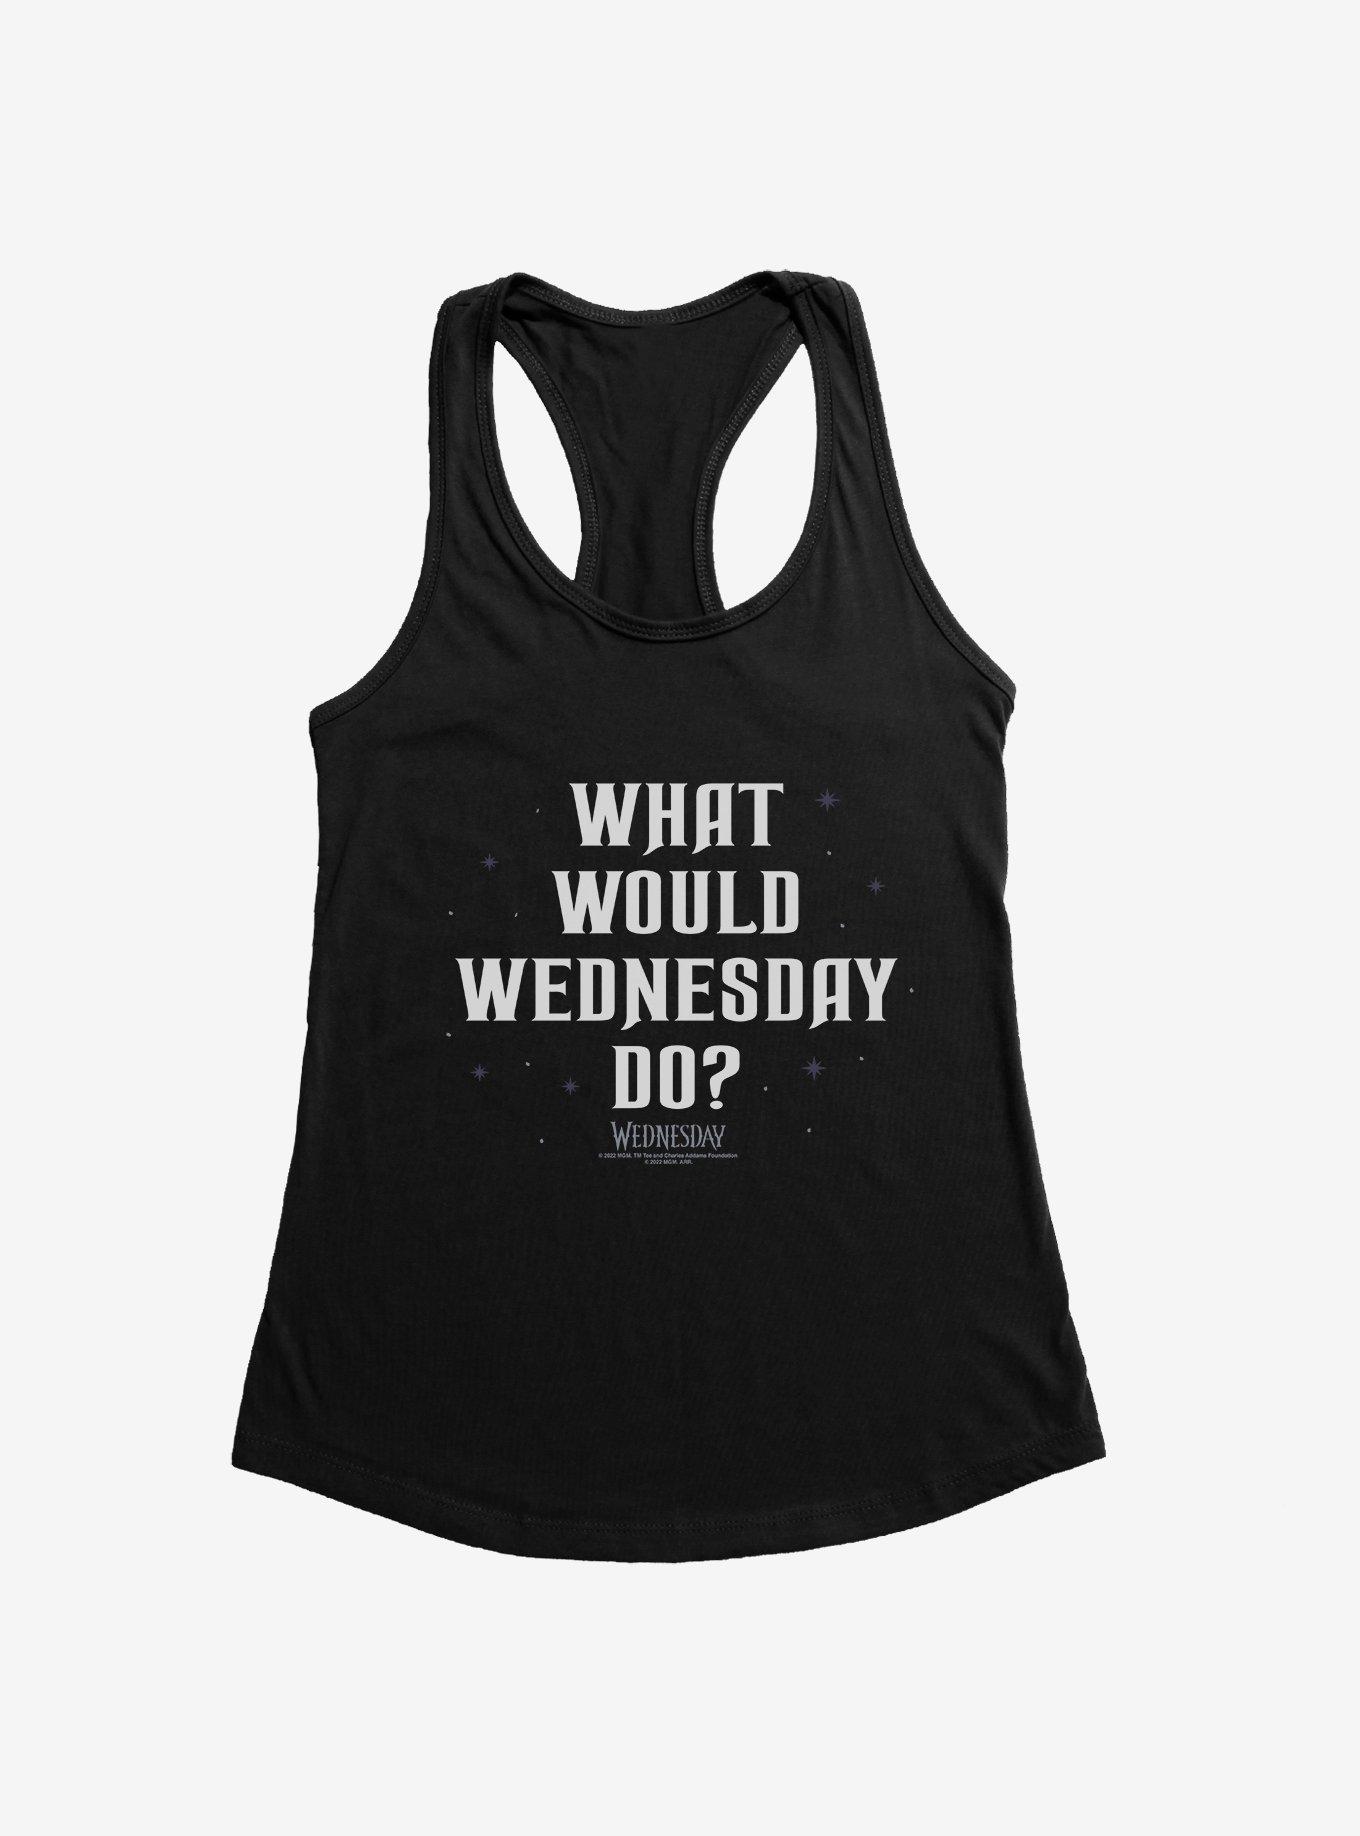 Wednesday What Would Wednesday Do? Girls Tank, BLACK, hi-res